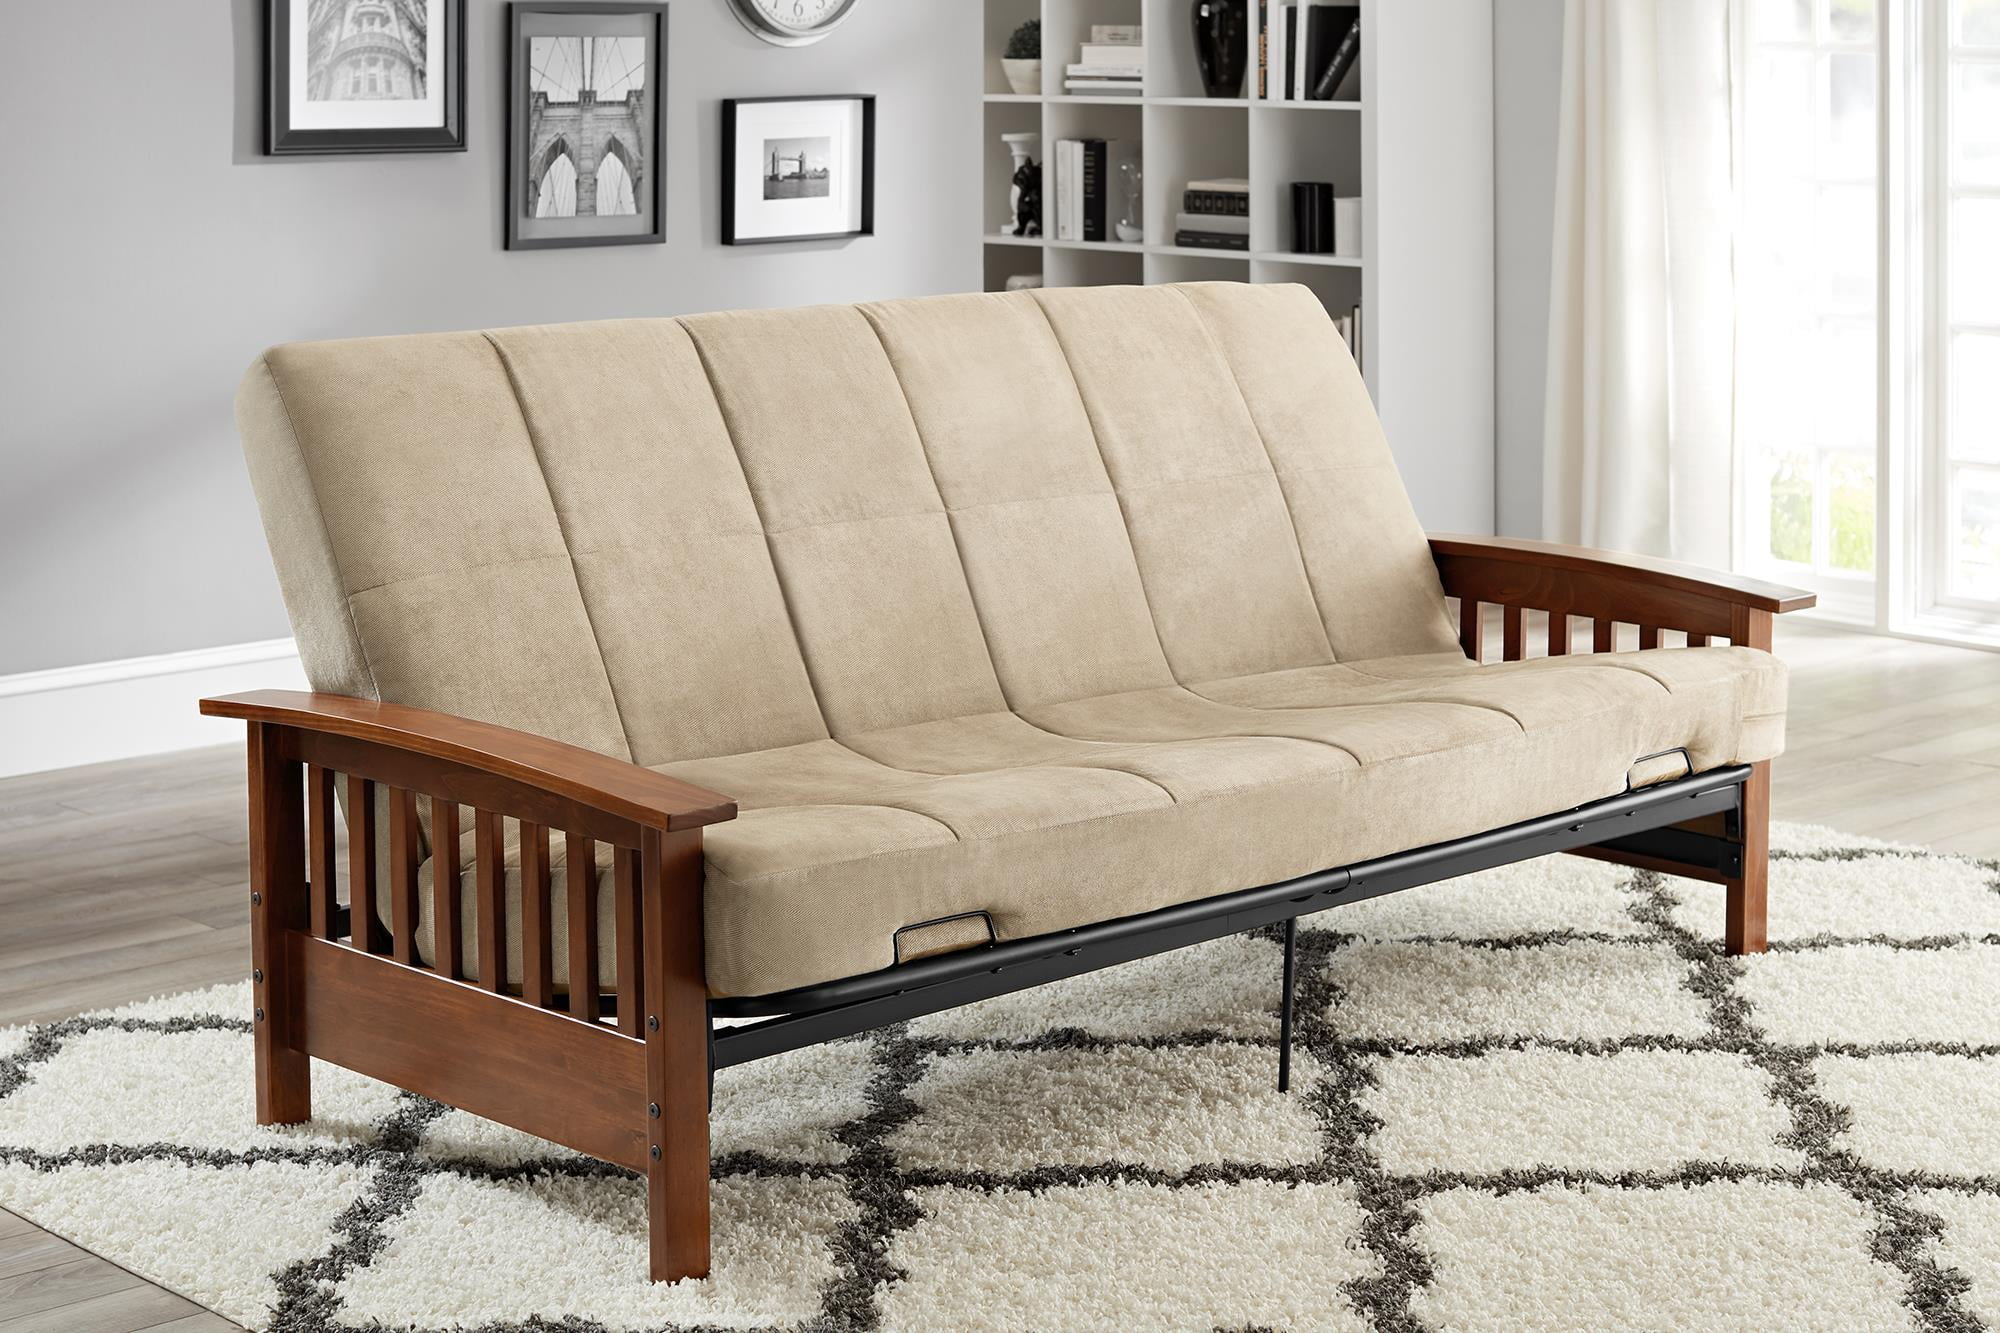 mattress topper for futon couch